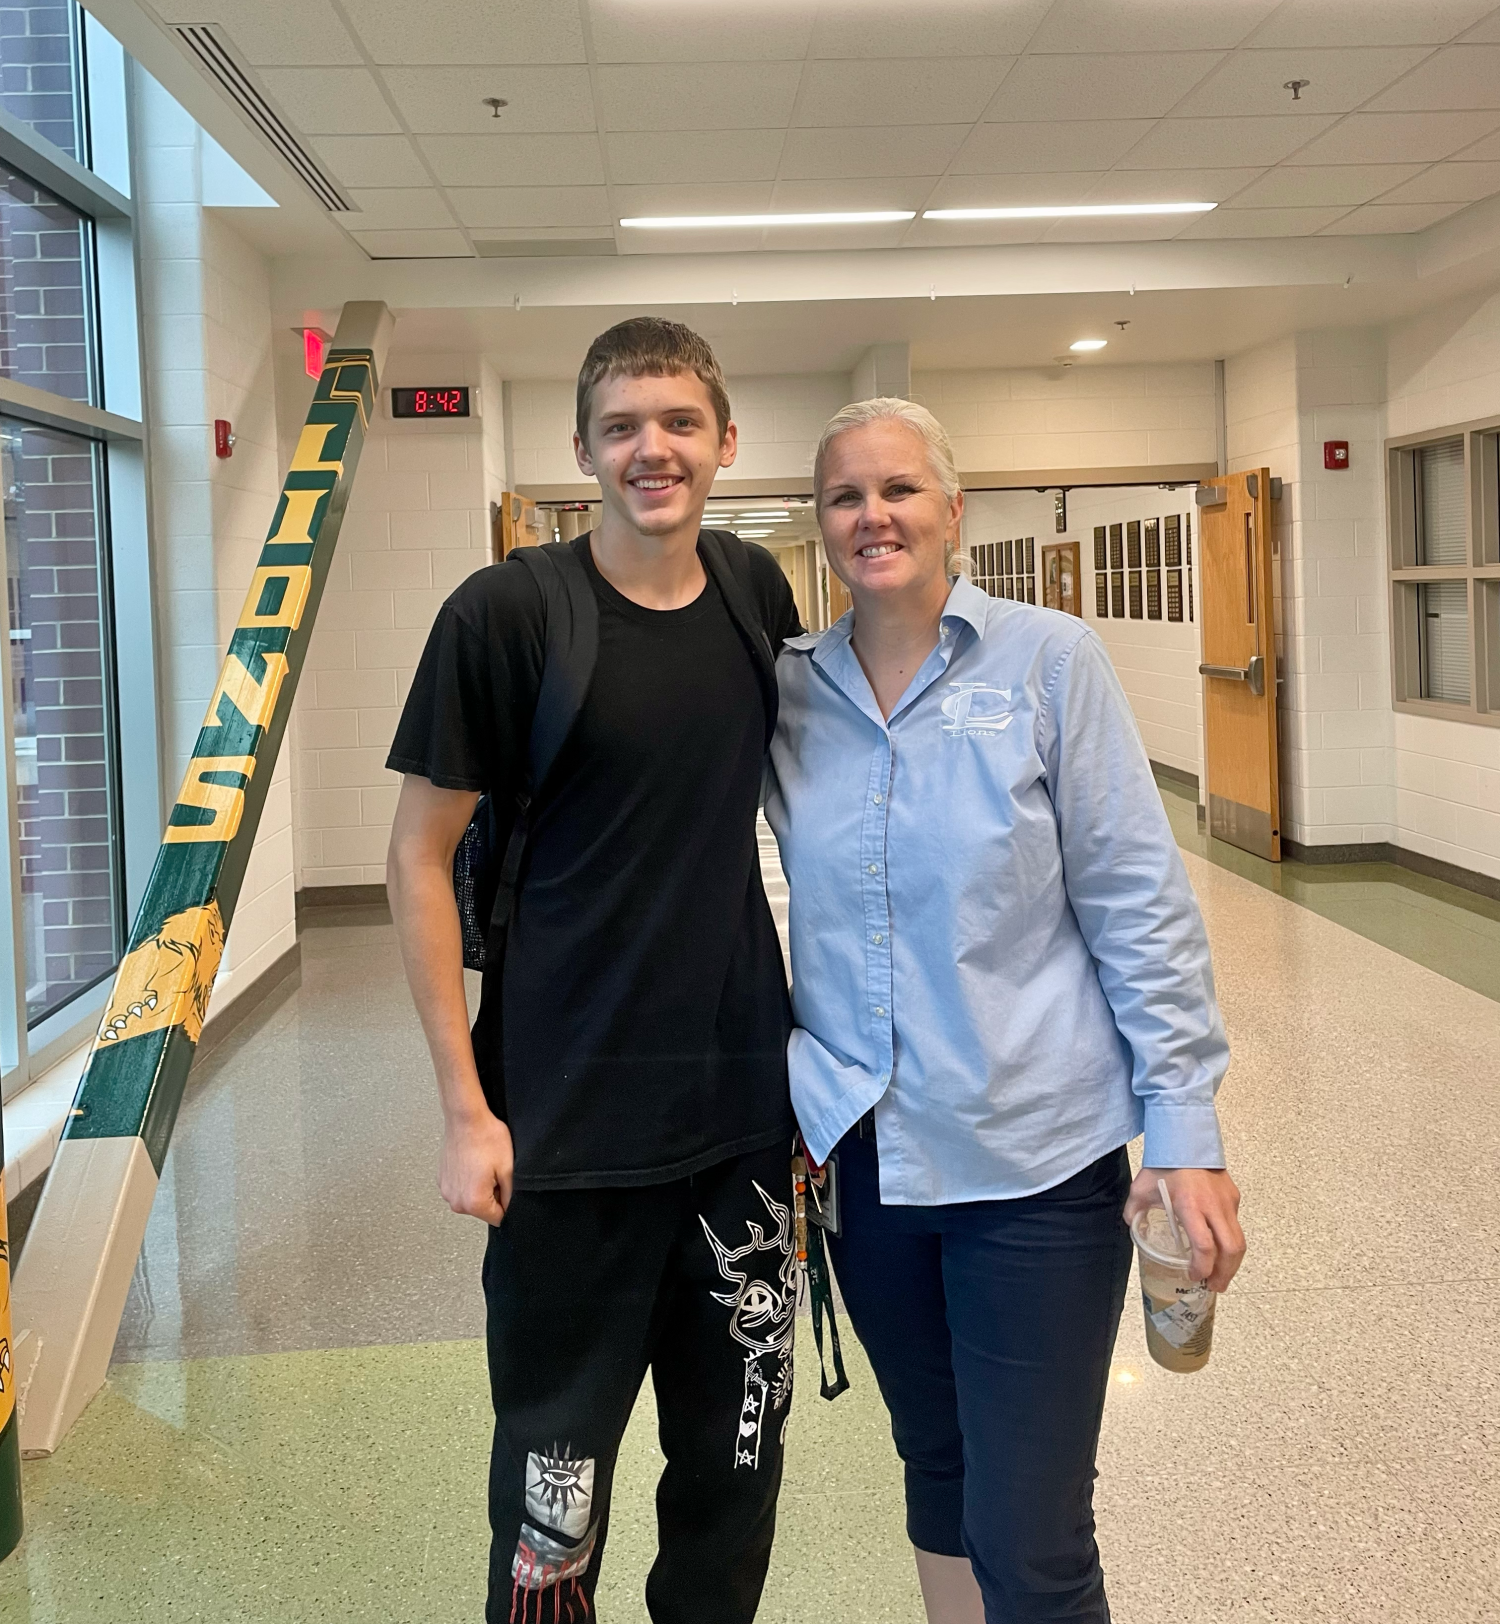 Zachary Hodges poses in the hallway with one of his favorite administrators, Dr. Thiemann.